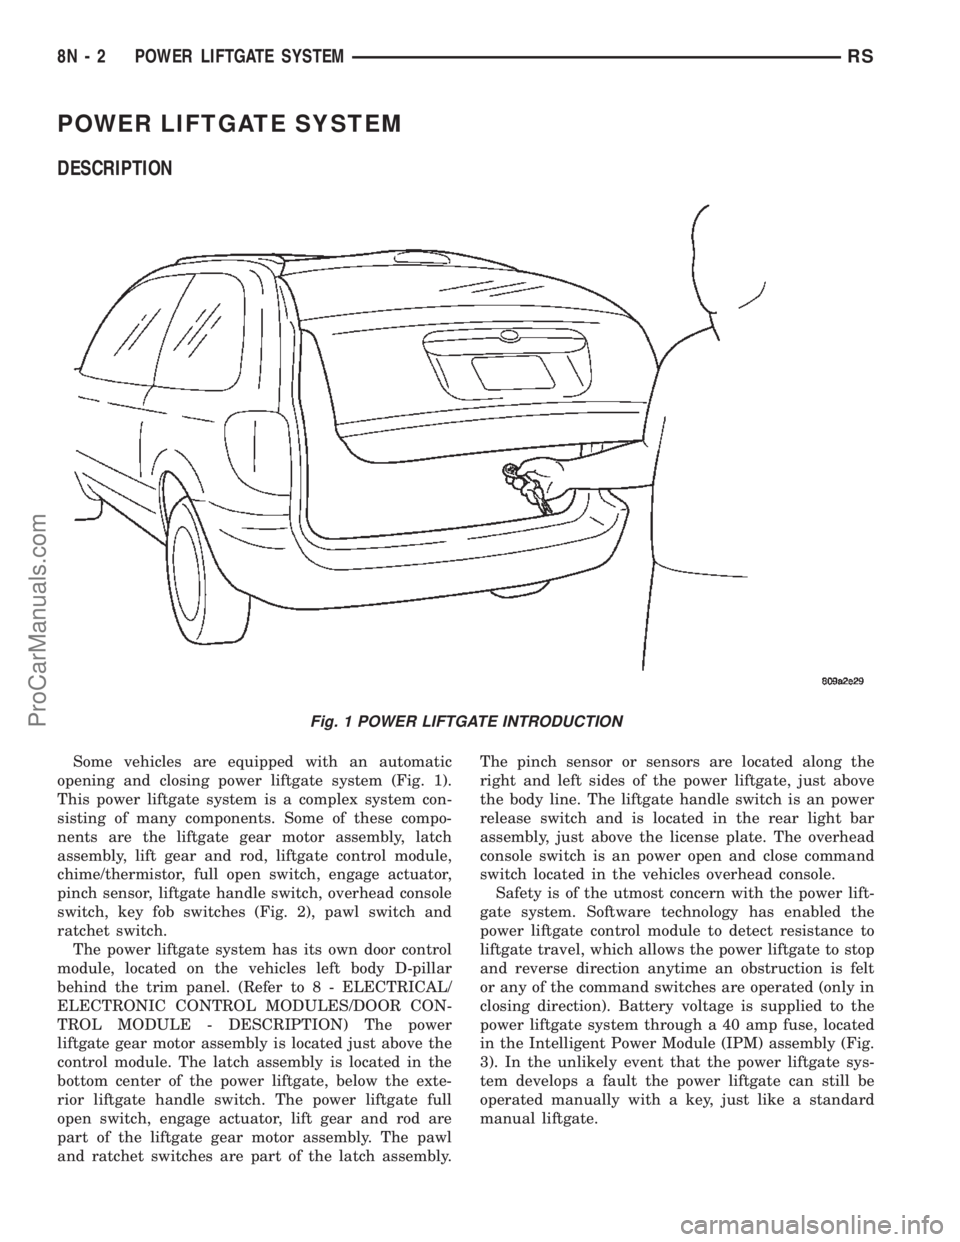 CHRYSLER CARAVAN 2002  Service Manual POWER LIFTGATE SYSTEM
DESCRIPTION
Some vehicles are equipped with an automatic
opening and closing power liftgate system (Fig. 1).
This power liftgate system is a complex system con-
sisting of many c